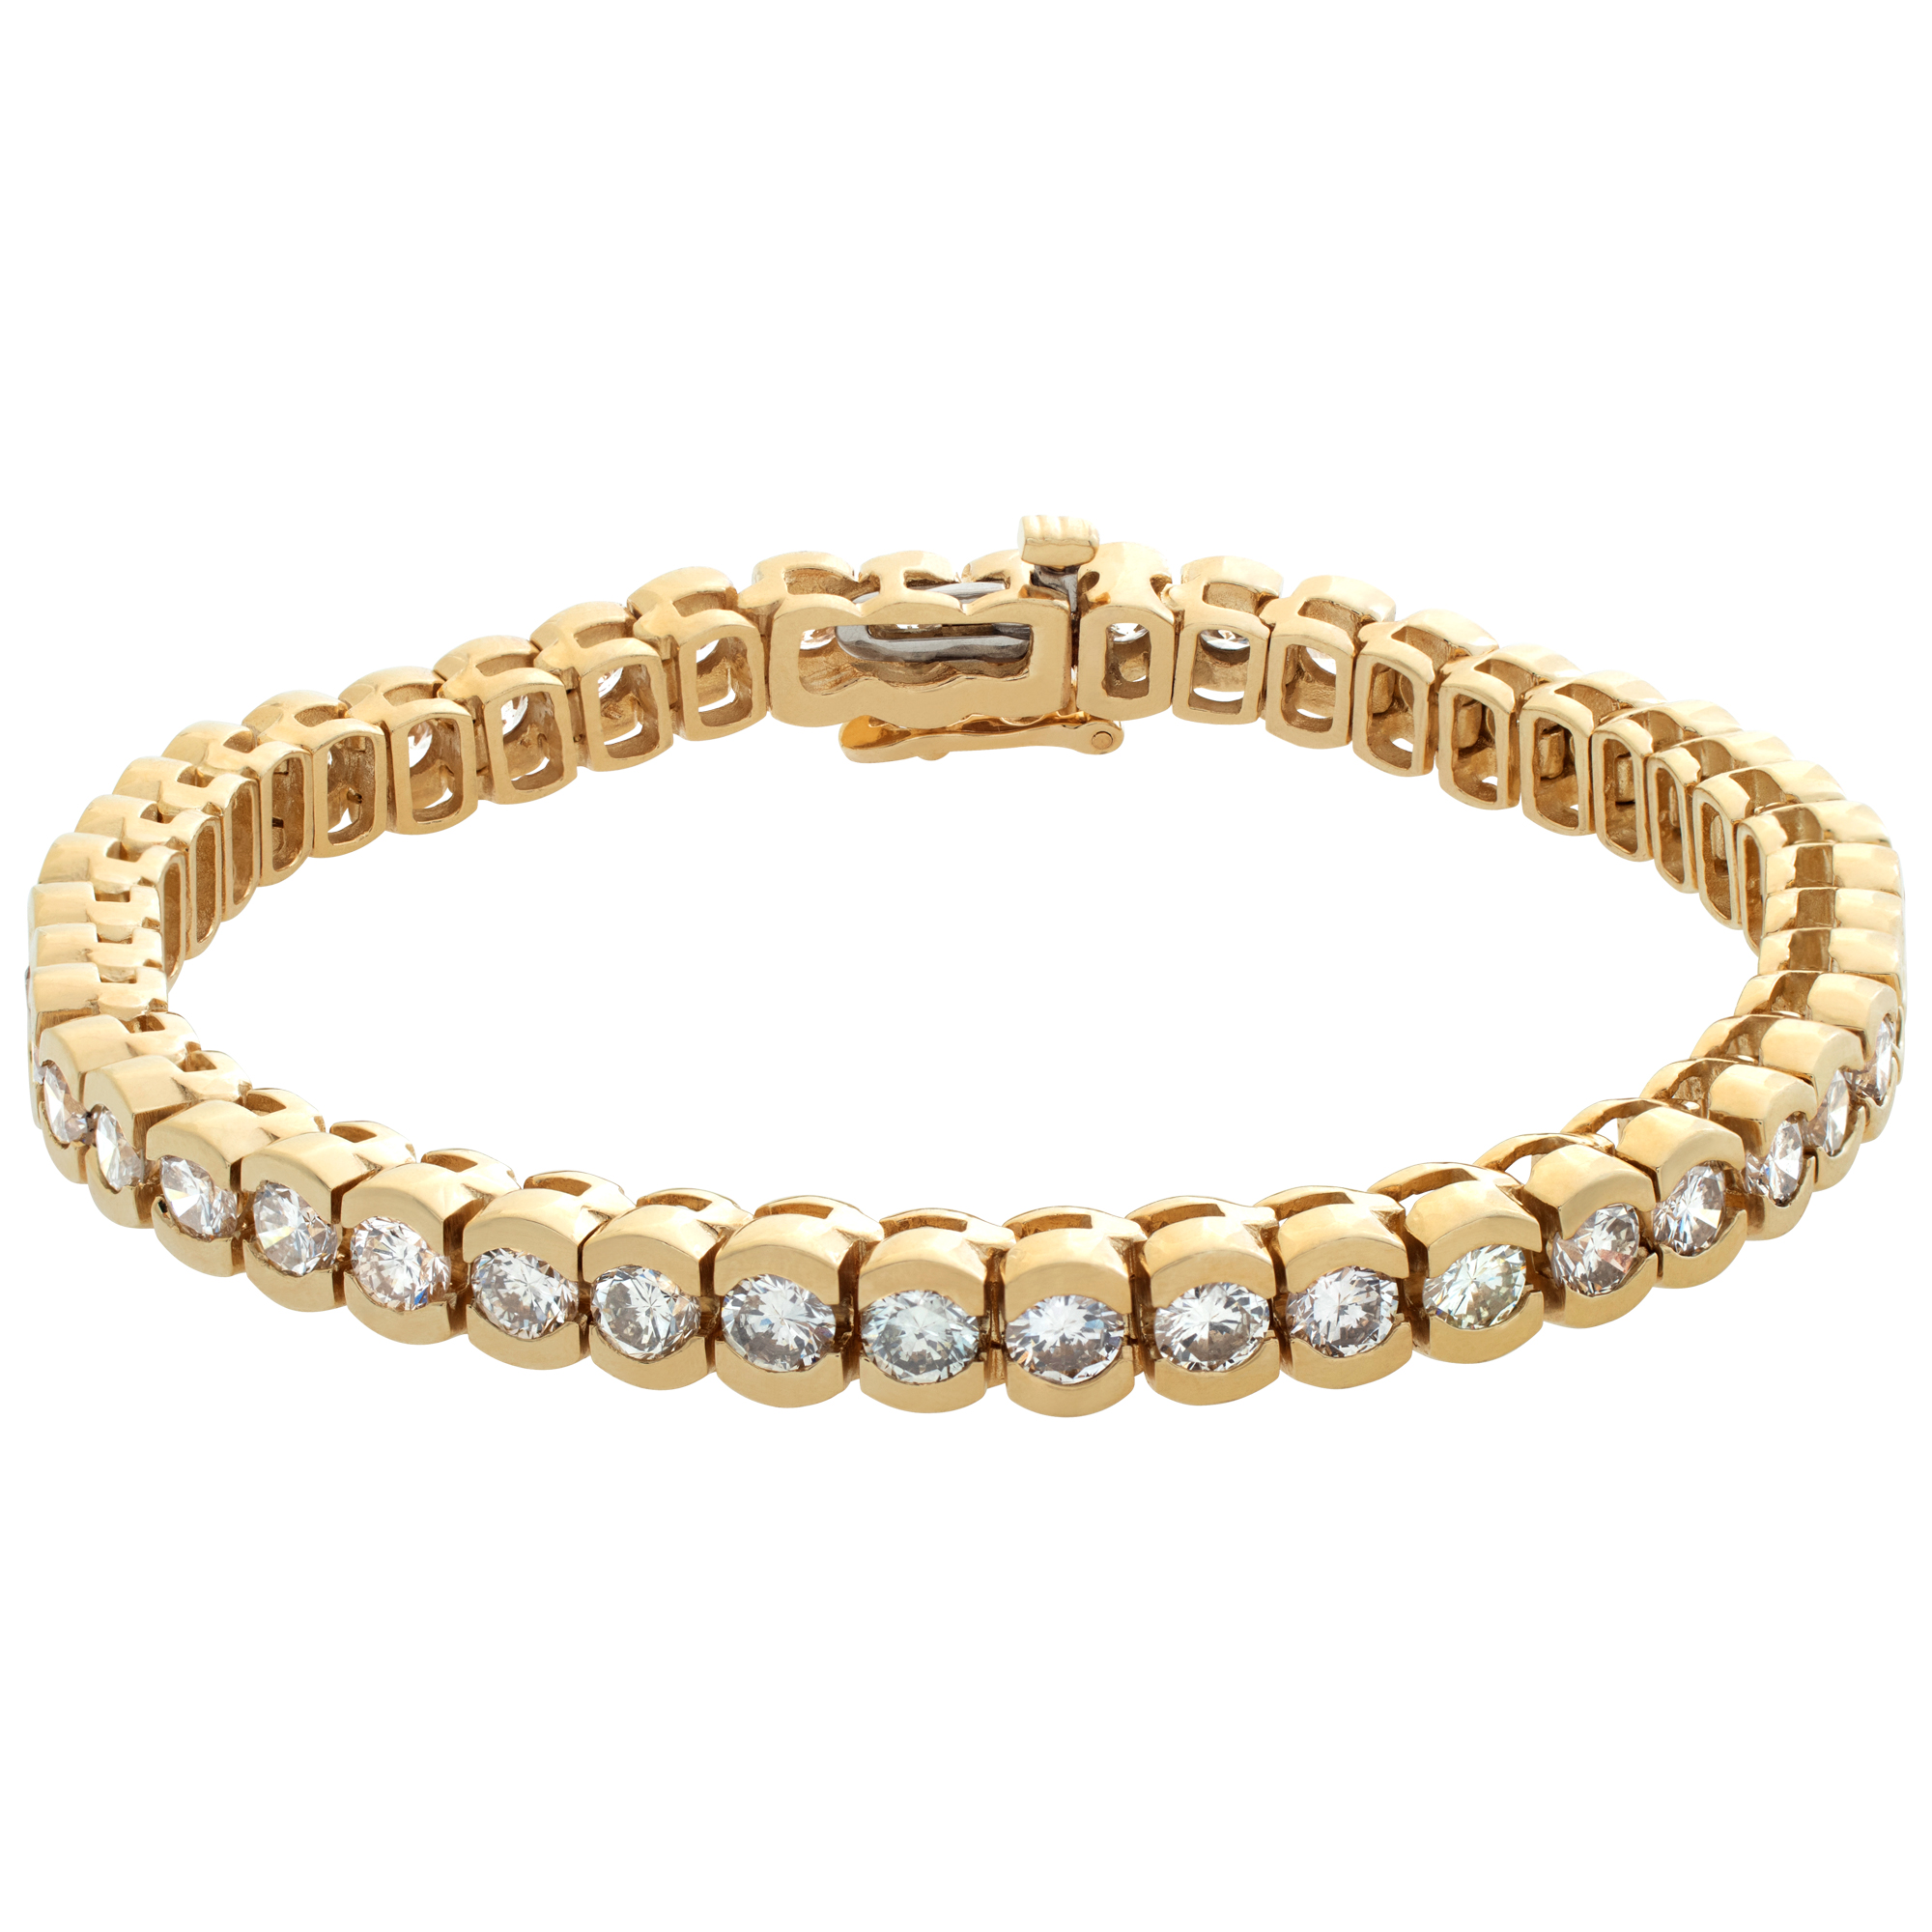 Diamond line bracelet in 14k yellow gold with over 7 carats in round diamonds image 1